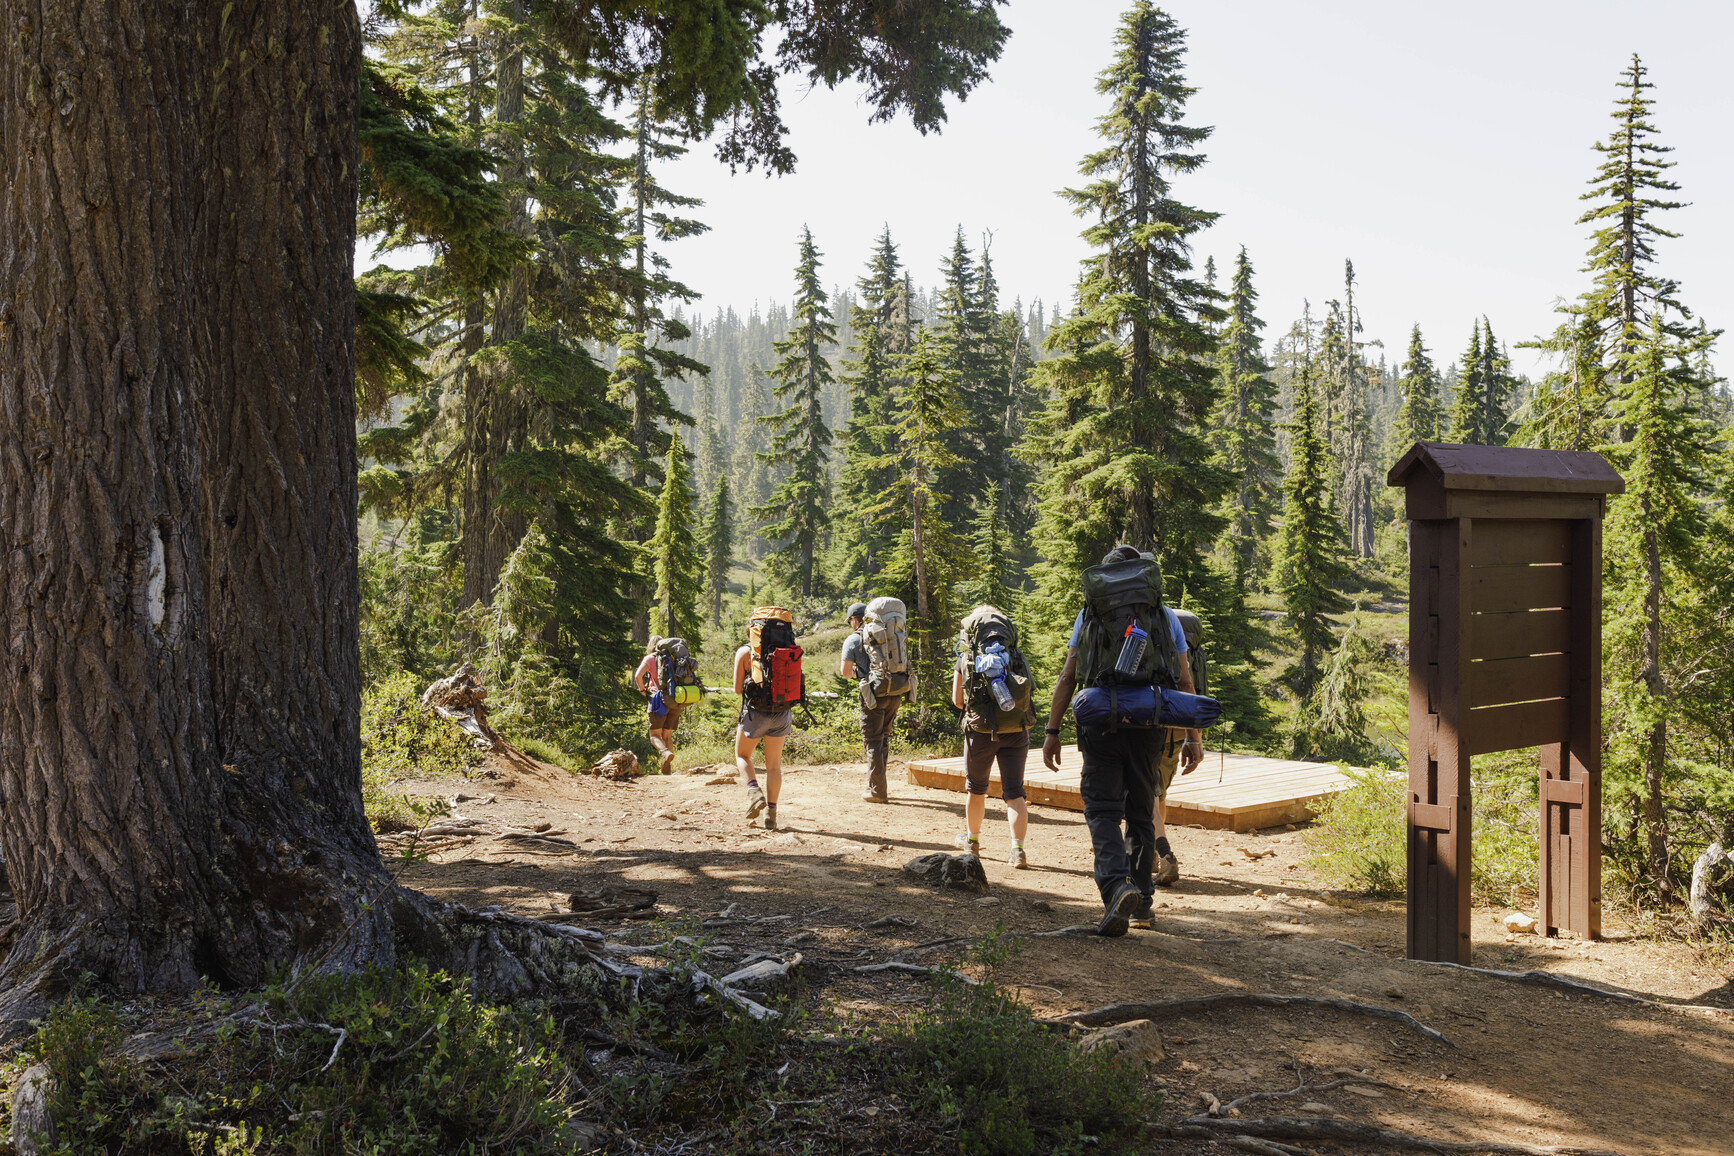 Group of hikers coming in to campsite in forested area